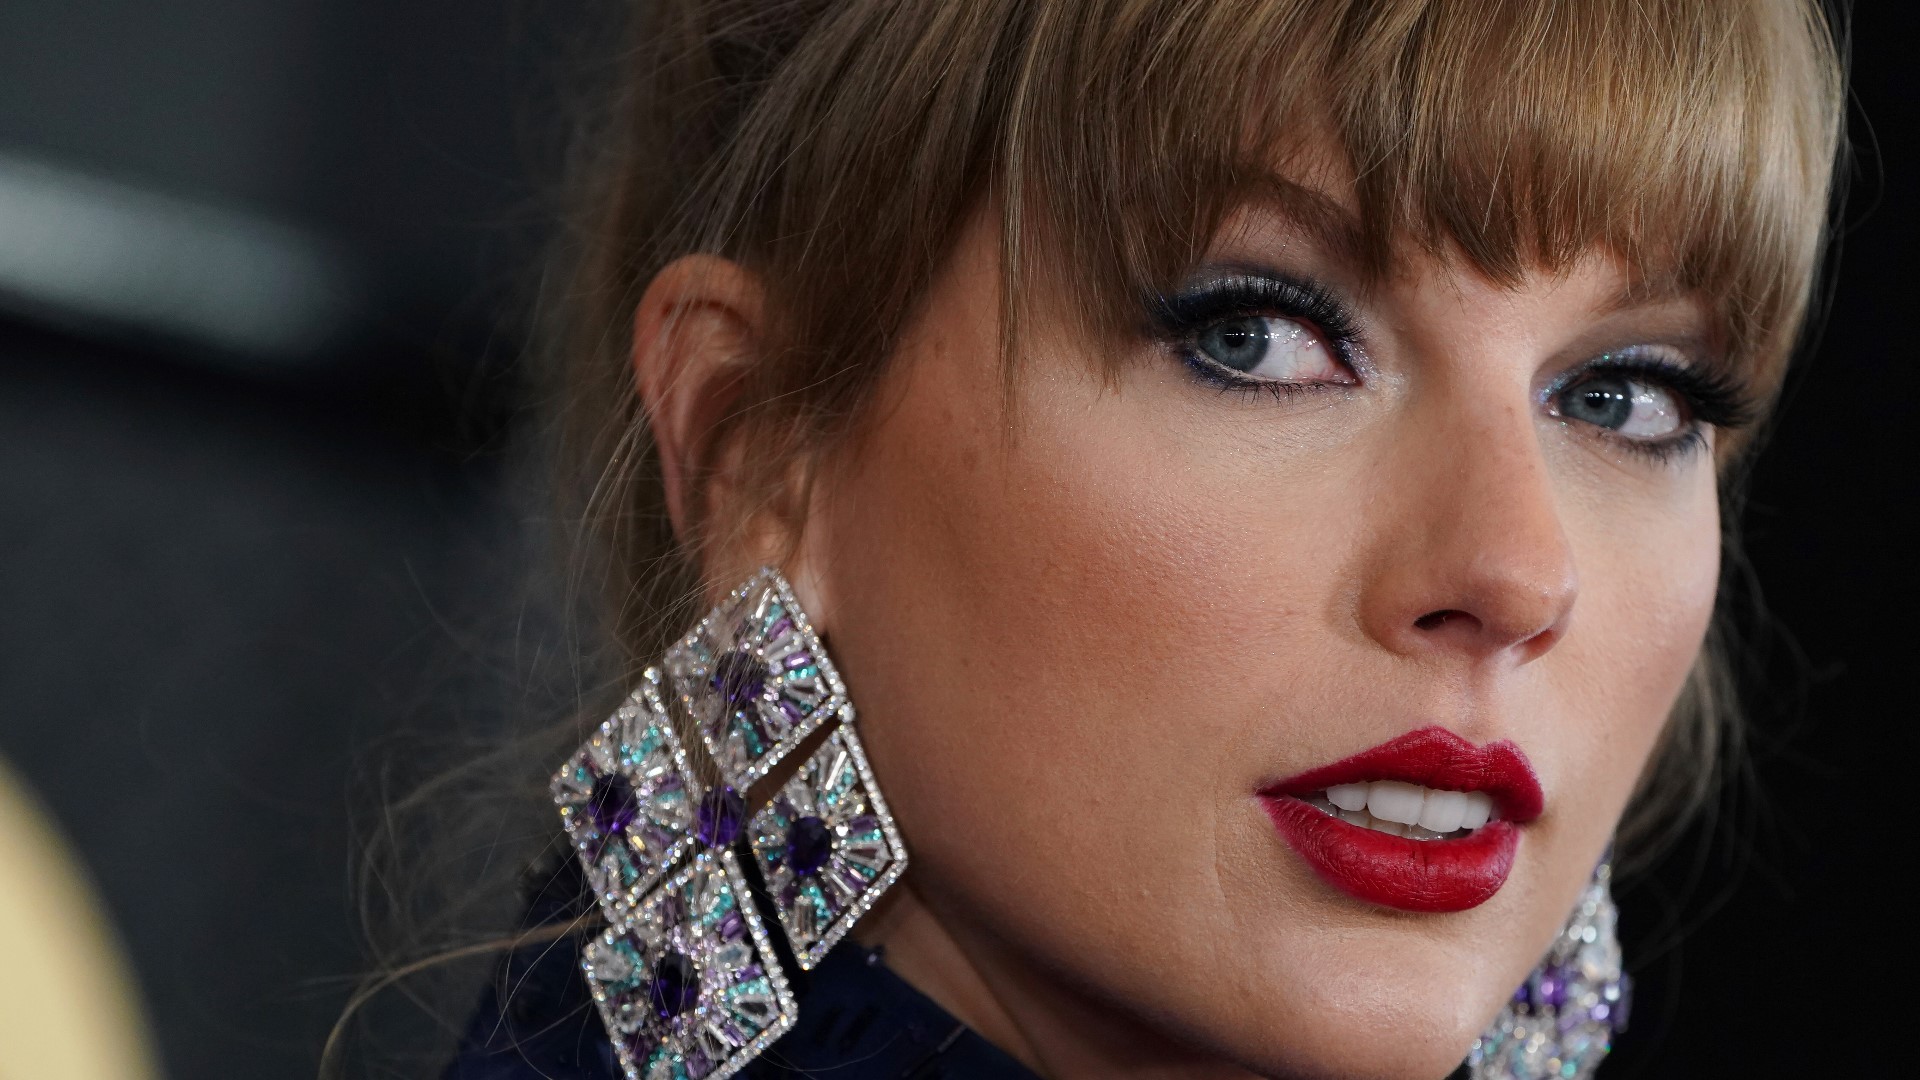 The King County Council is expected to proclaim July 18-25 as "Taylor Swift Week" in King County.